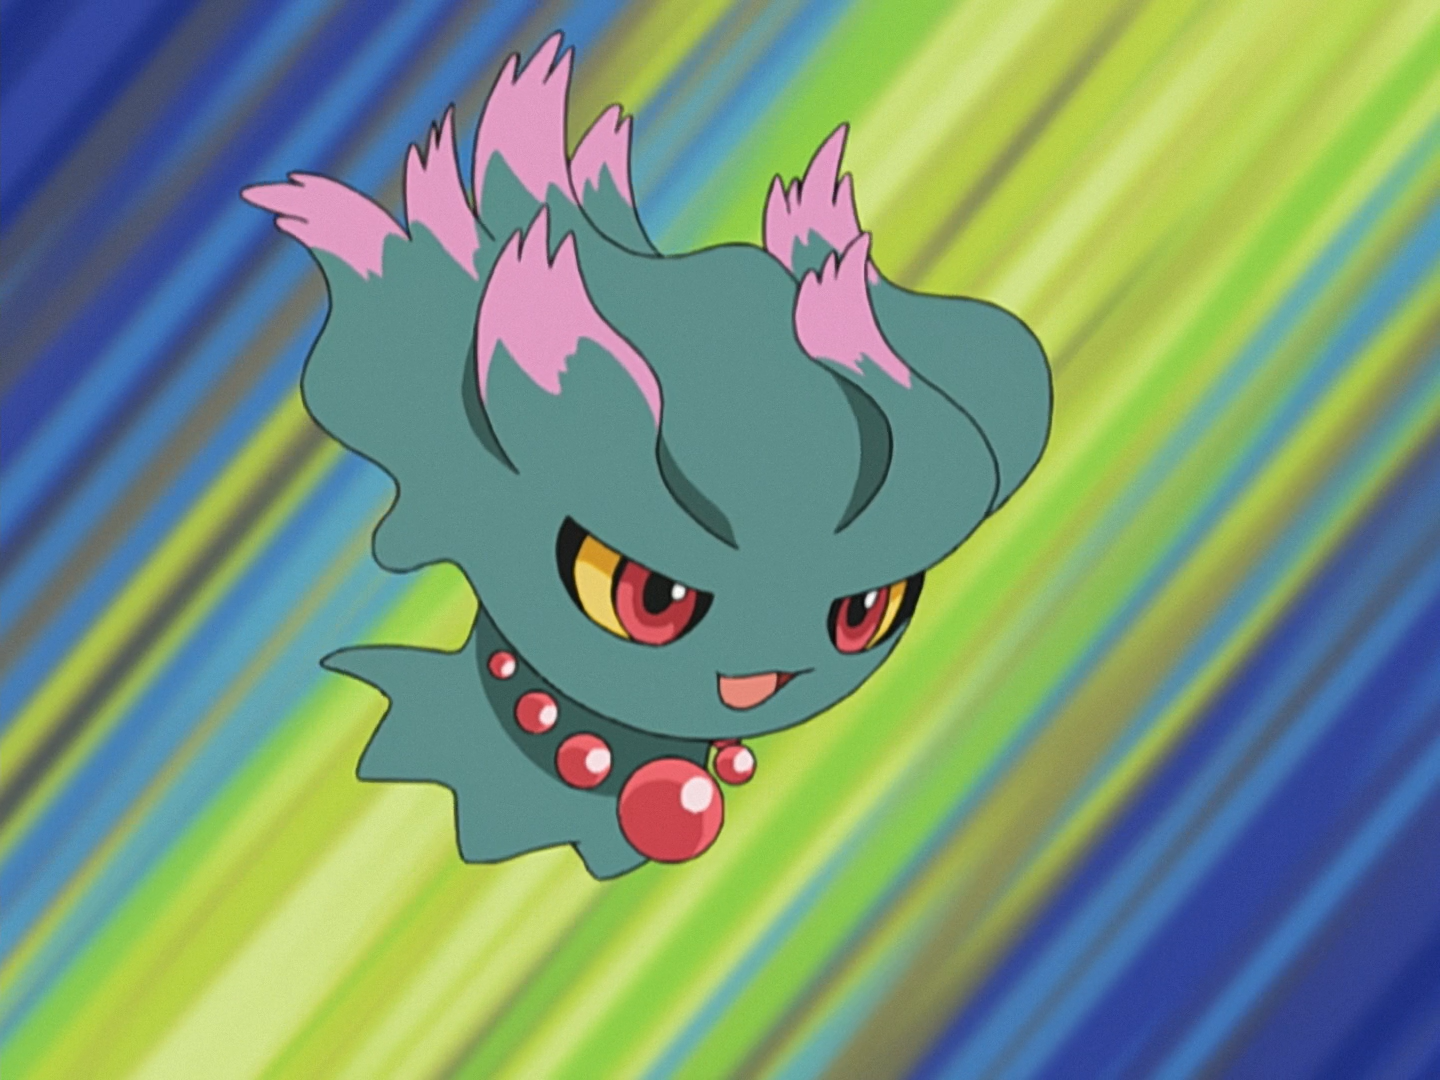 This Misdreavus is a ghost-type Pokémon owned by Katie. 